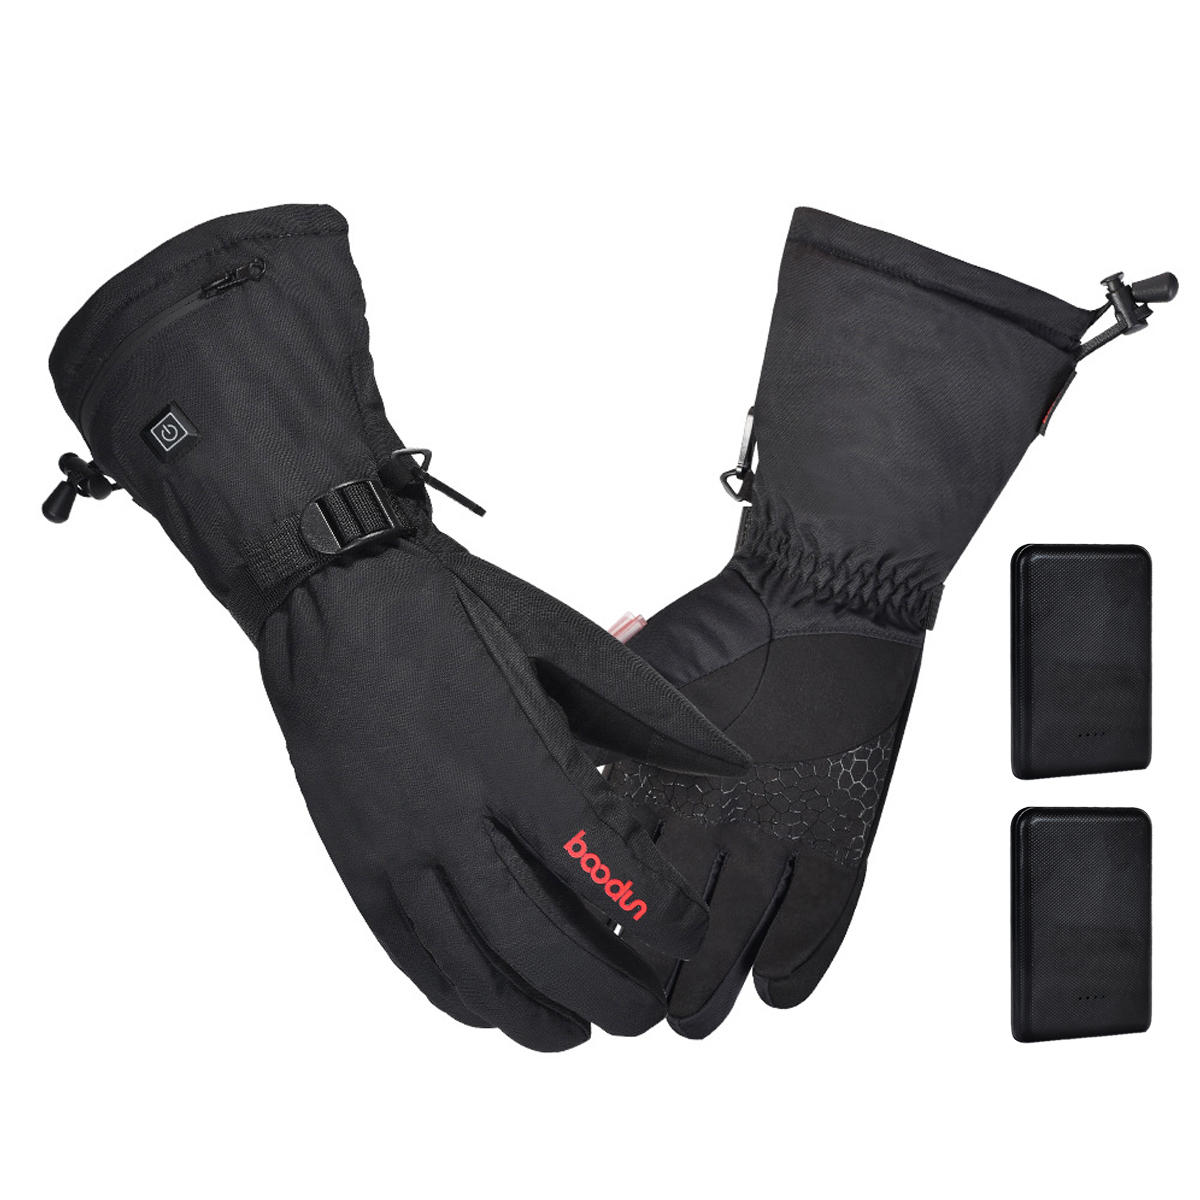 

3000MAh Rechargeable Electric Heating Gloves Battery Waterproof Skiing Motorcycle Heated Winter Hand Warmer